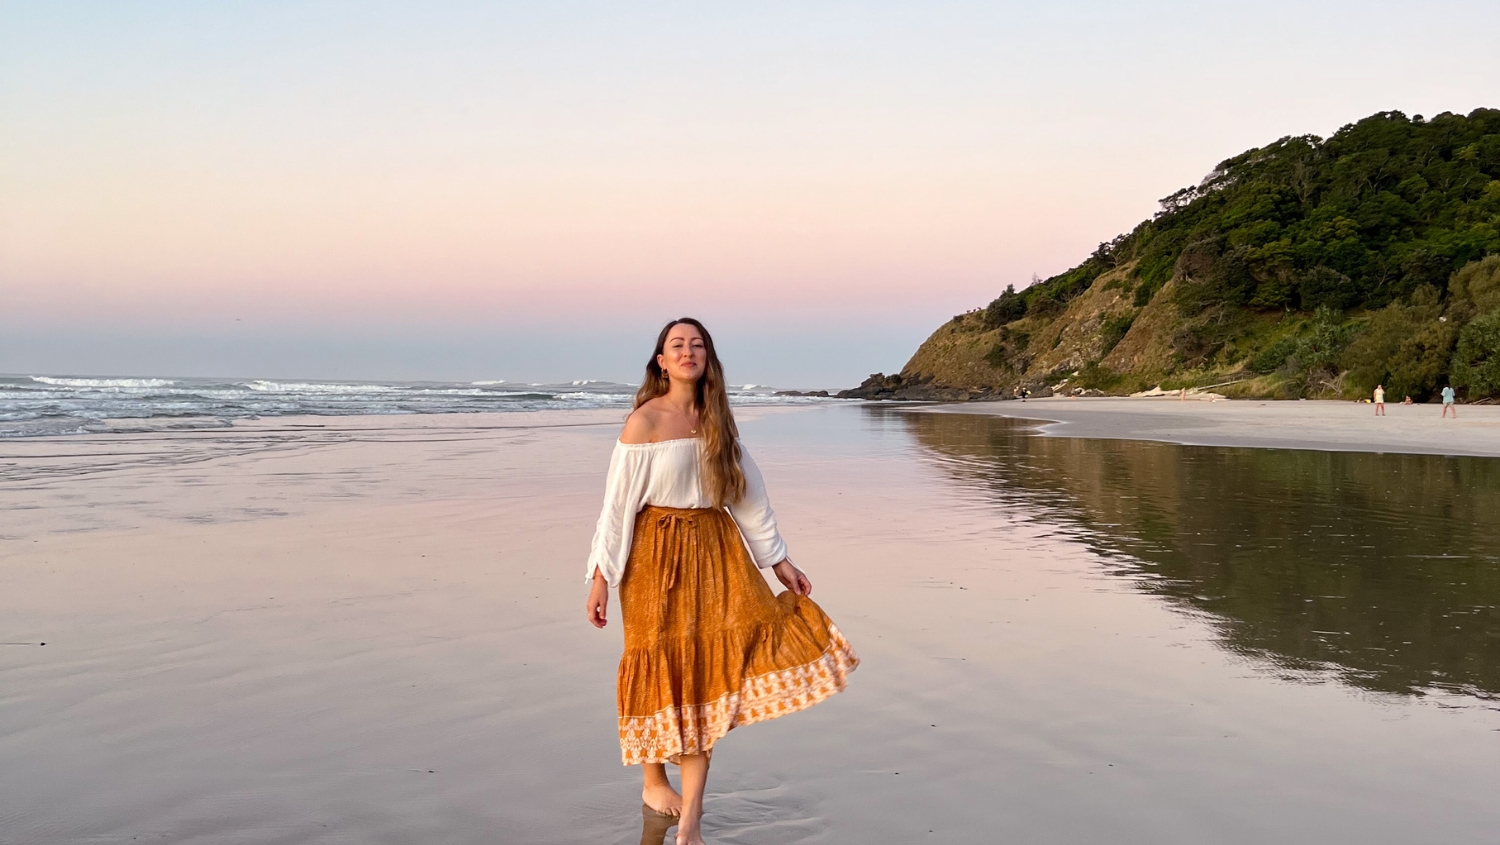 4 Nights in Byron Bay | Caity Clarkson shares her magical mid-week escape to Byron Bay.